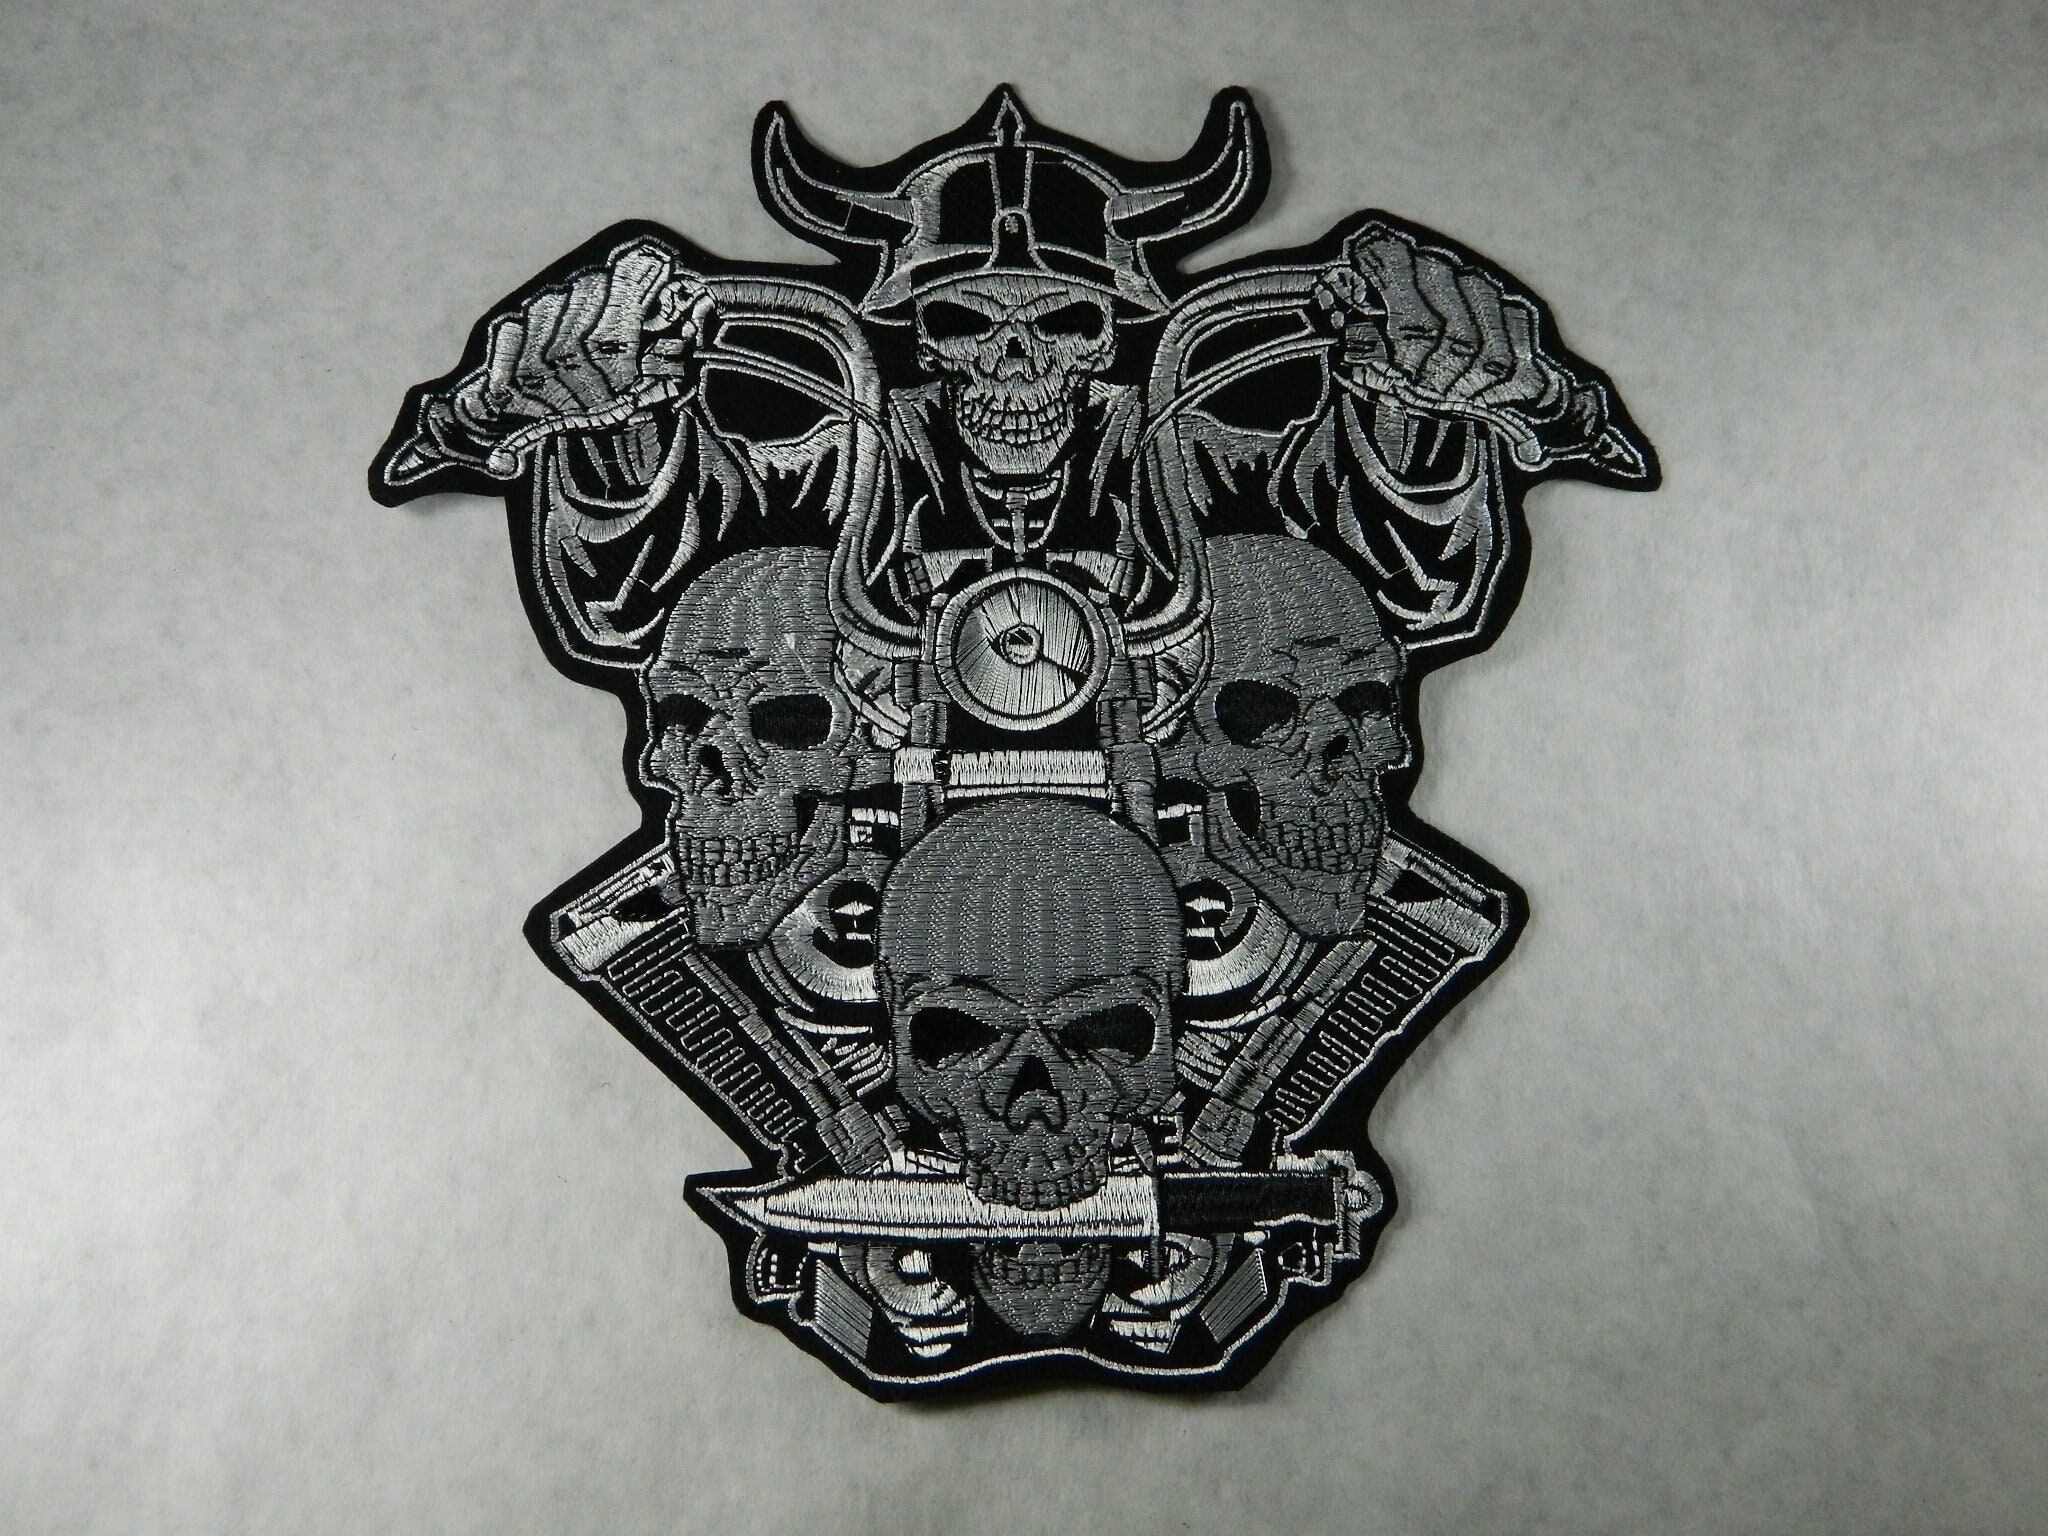 DEATH BEFORE DISHONOR SKULL MC MOTORCYCLE BIKE IRON PATCH LARGE –